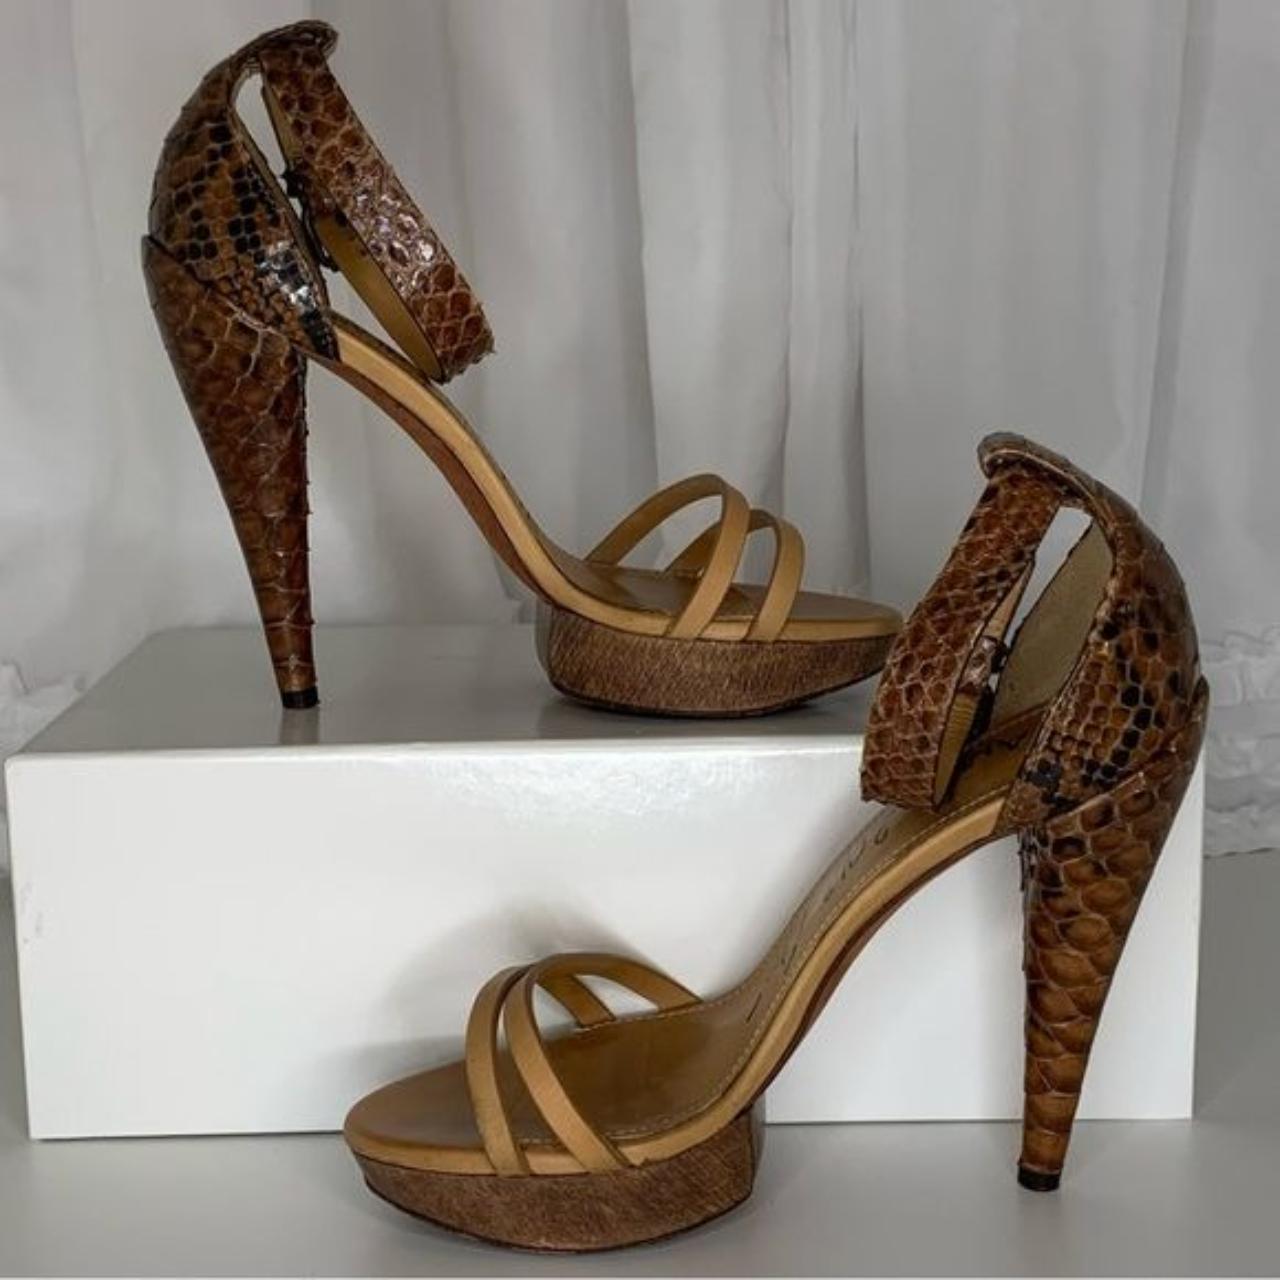 Lanvin Women's Tan and Brown Sandals (3)